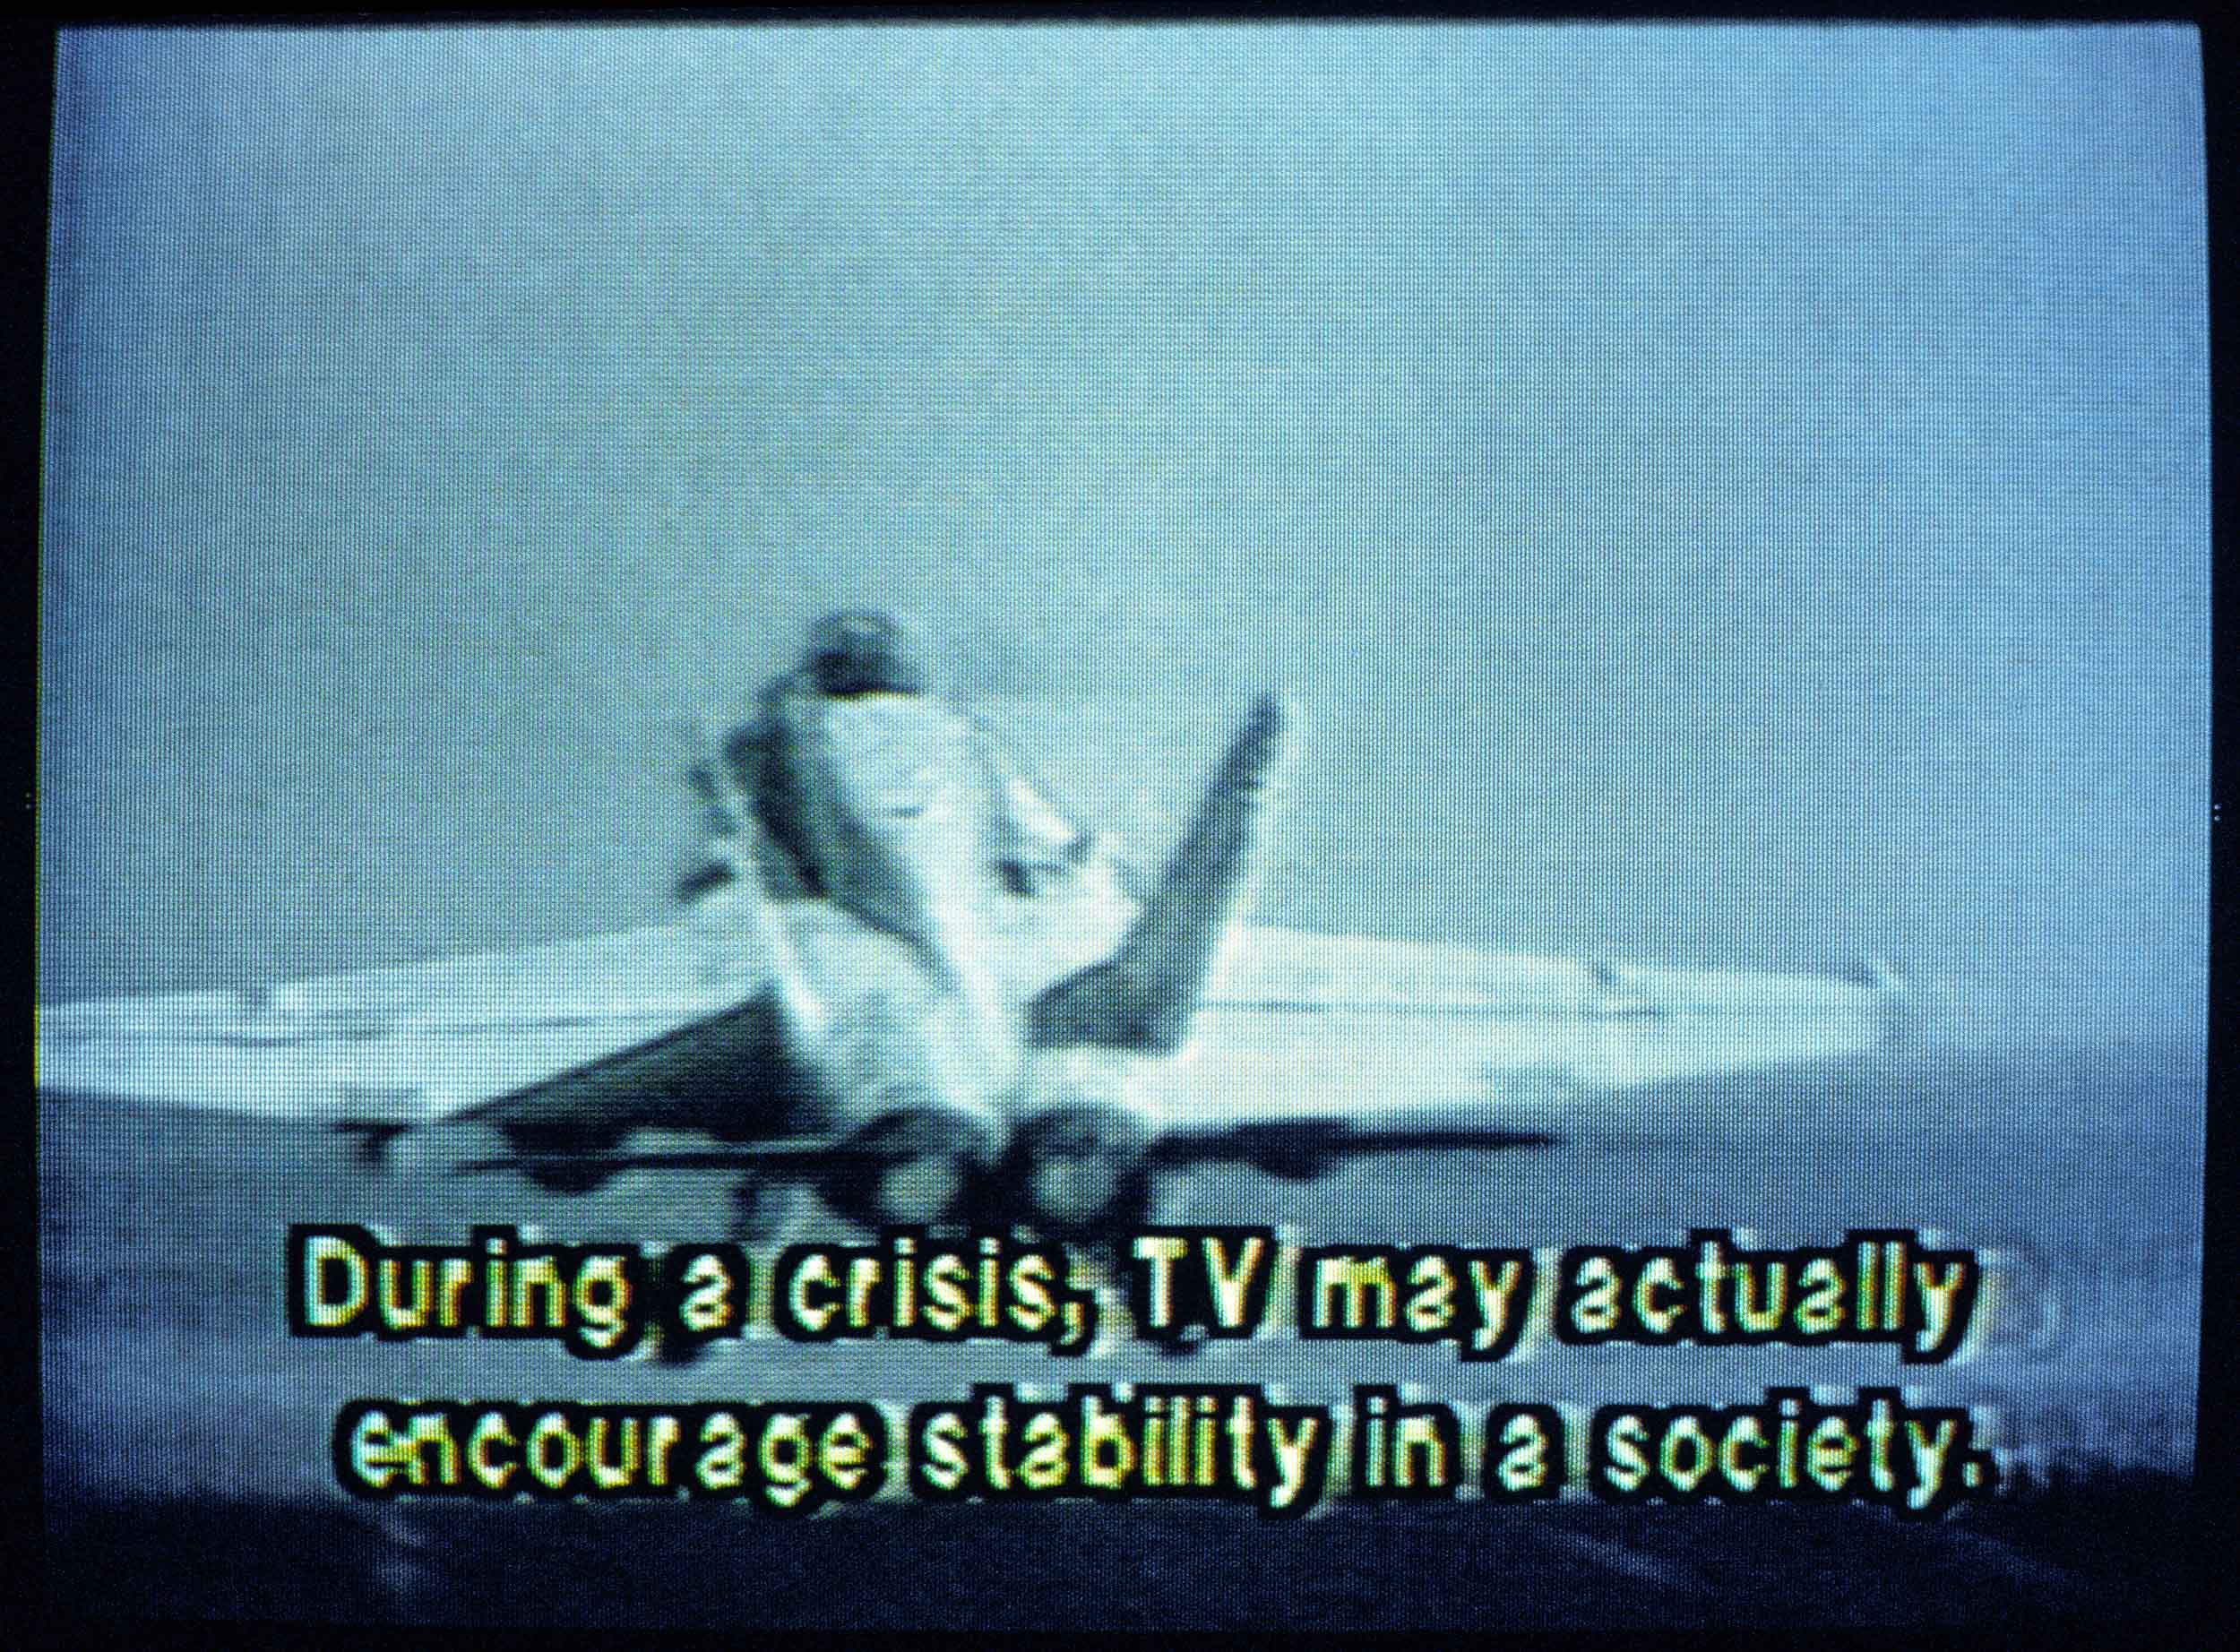 During a crisis, TV may actually encourage stability in a society.